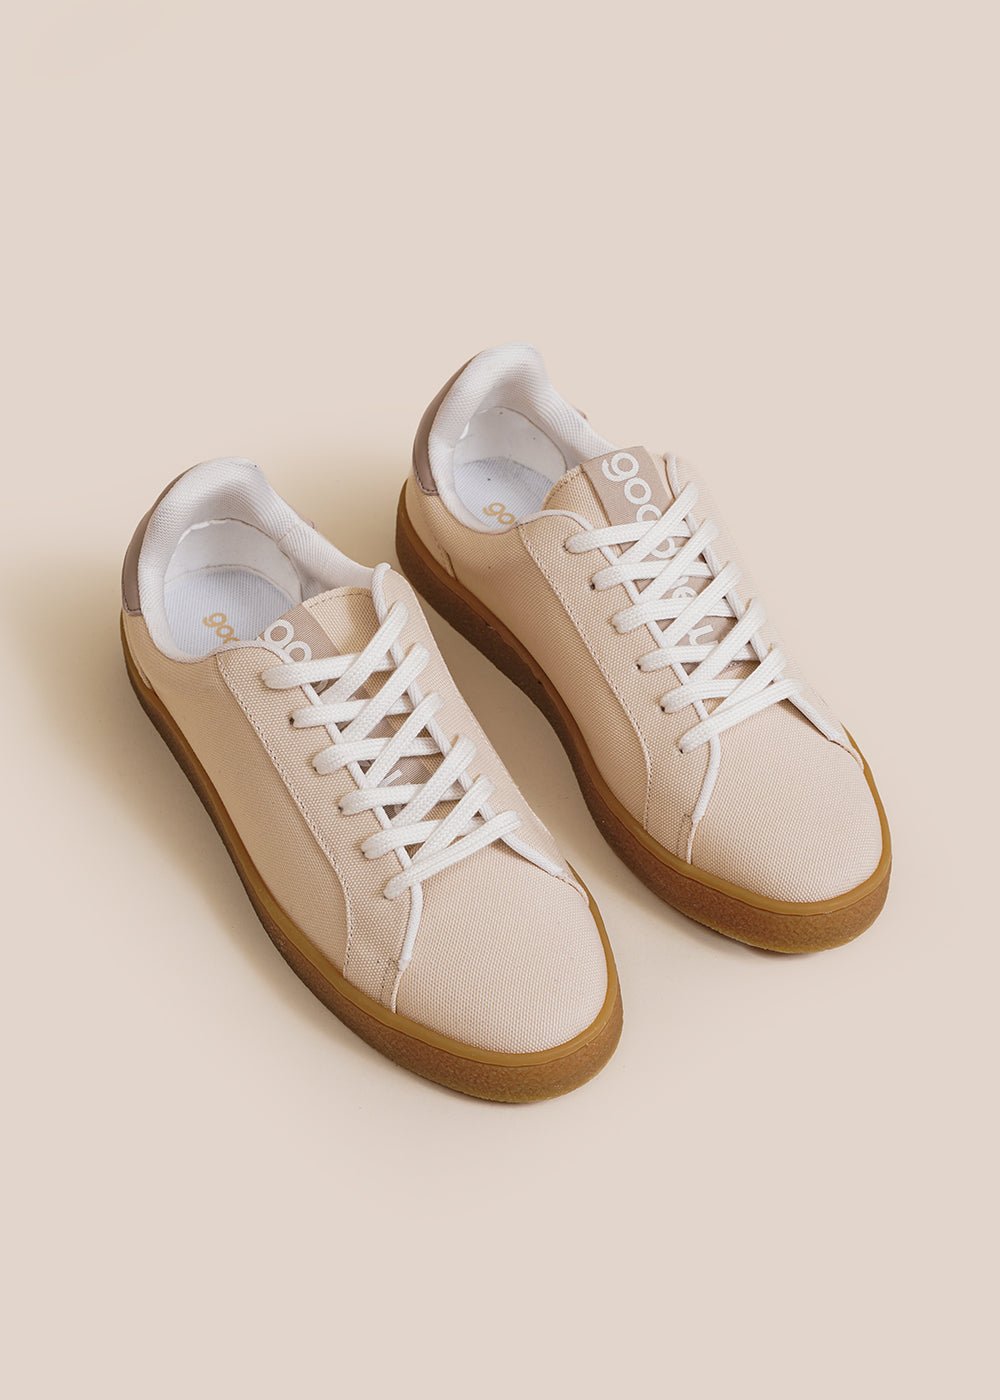 GOOD NEWS Oatmeal Venus Sneakers - New Classics Studios Sustainable Ethical Fashion Canada